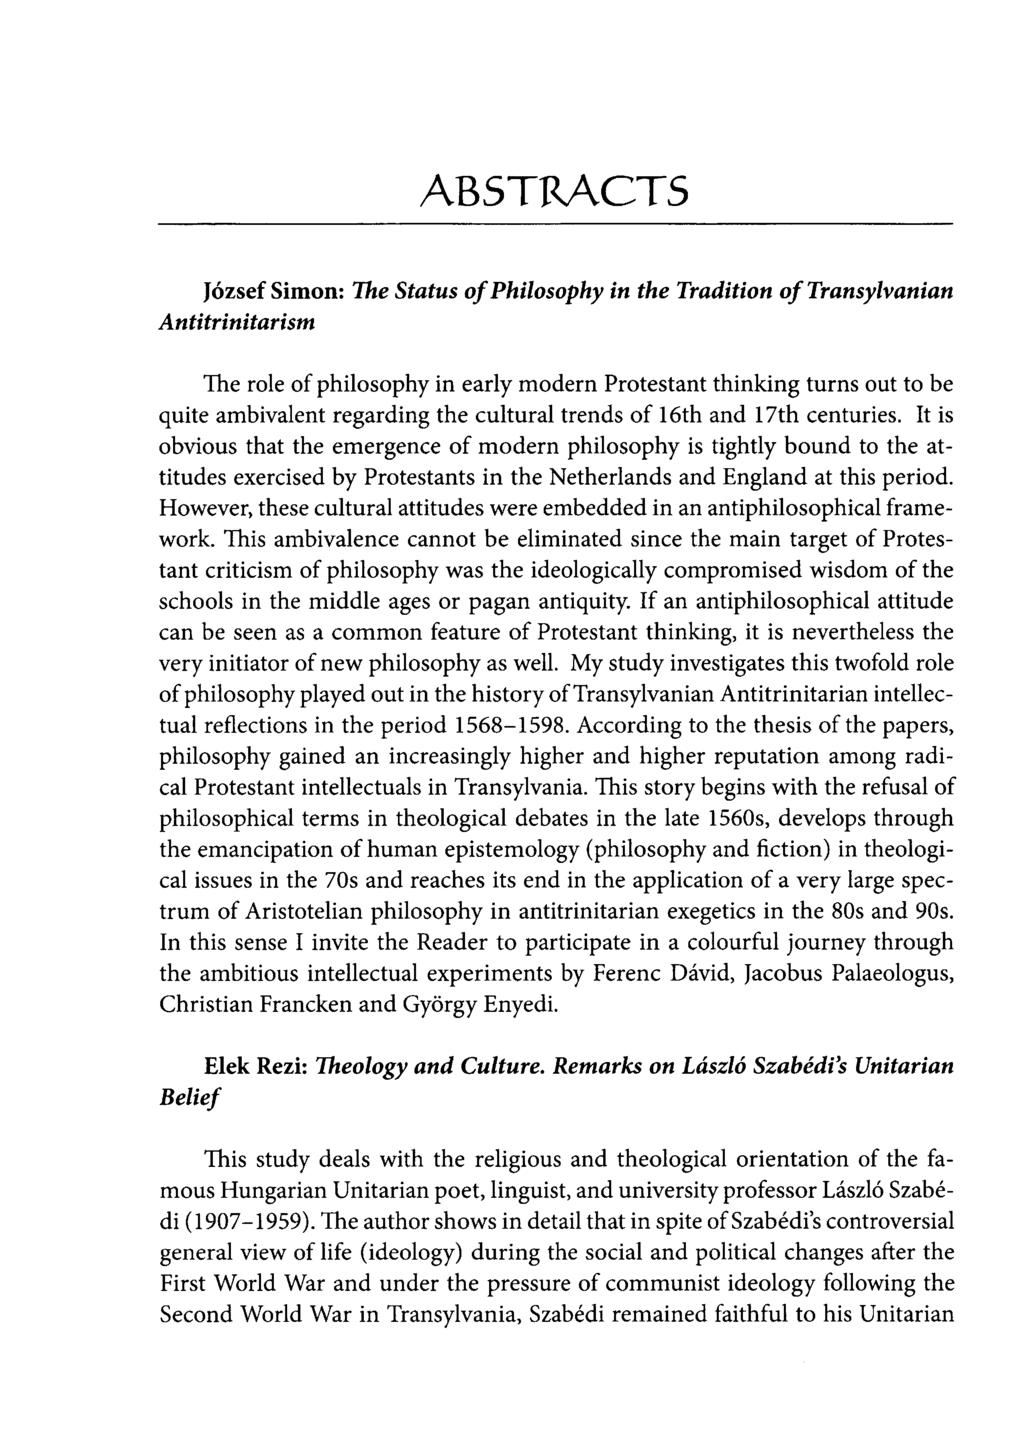 ABSTRACTS József Simon: The Status of Philosophy in the Tradition of Antitrinitarism Transylvanian The role of philosophy in early modern Protestant thinking turns out to be quite ambivalent